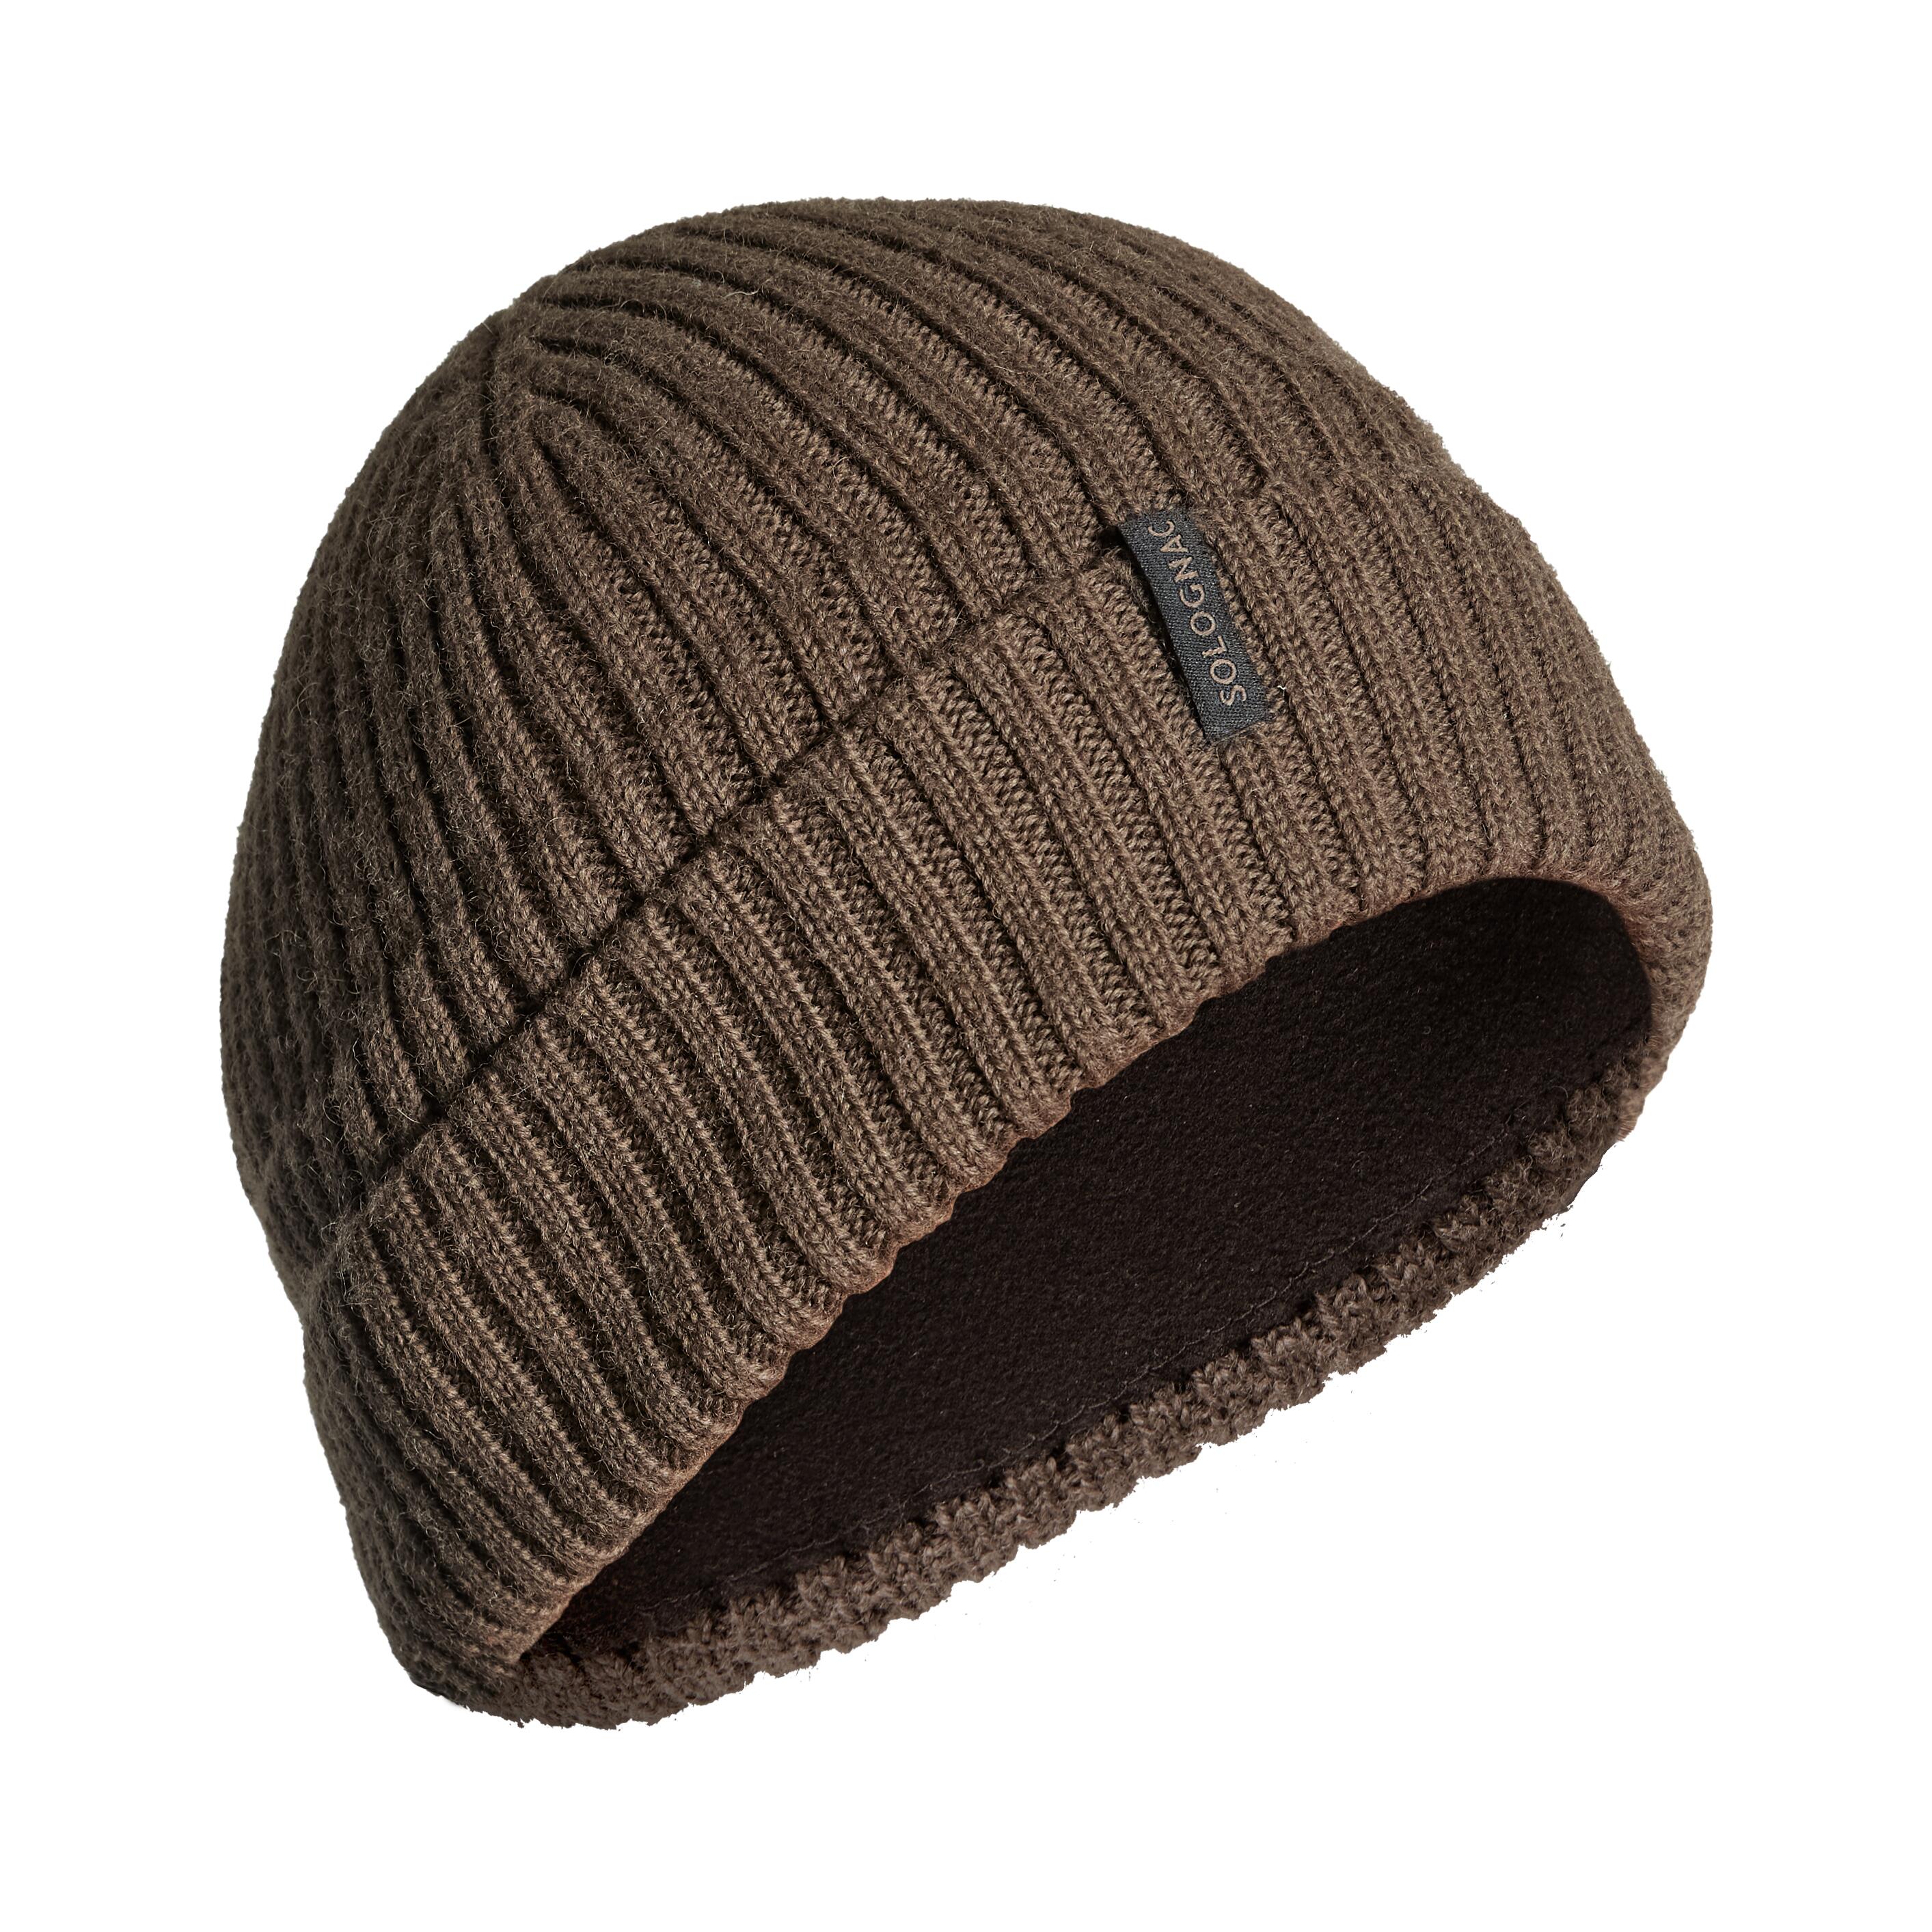 HAT KNITTED WOOL 900 BROWN 3/7